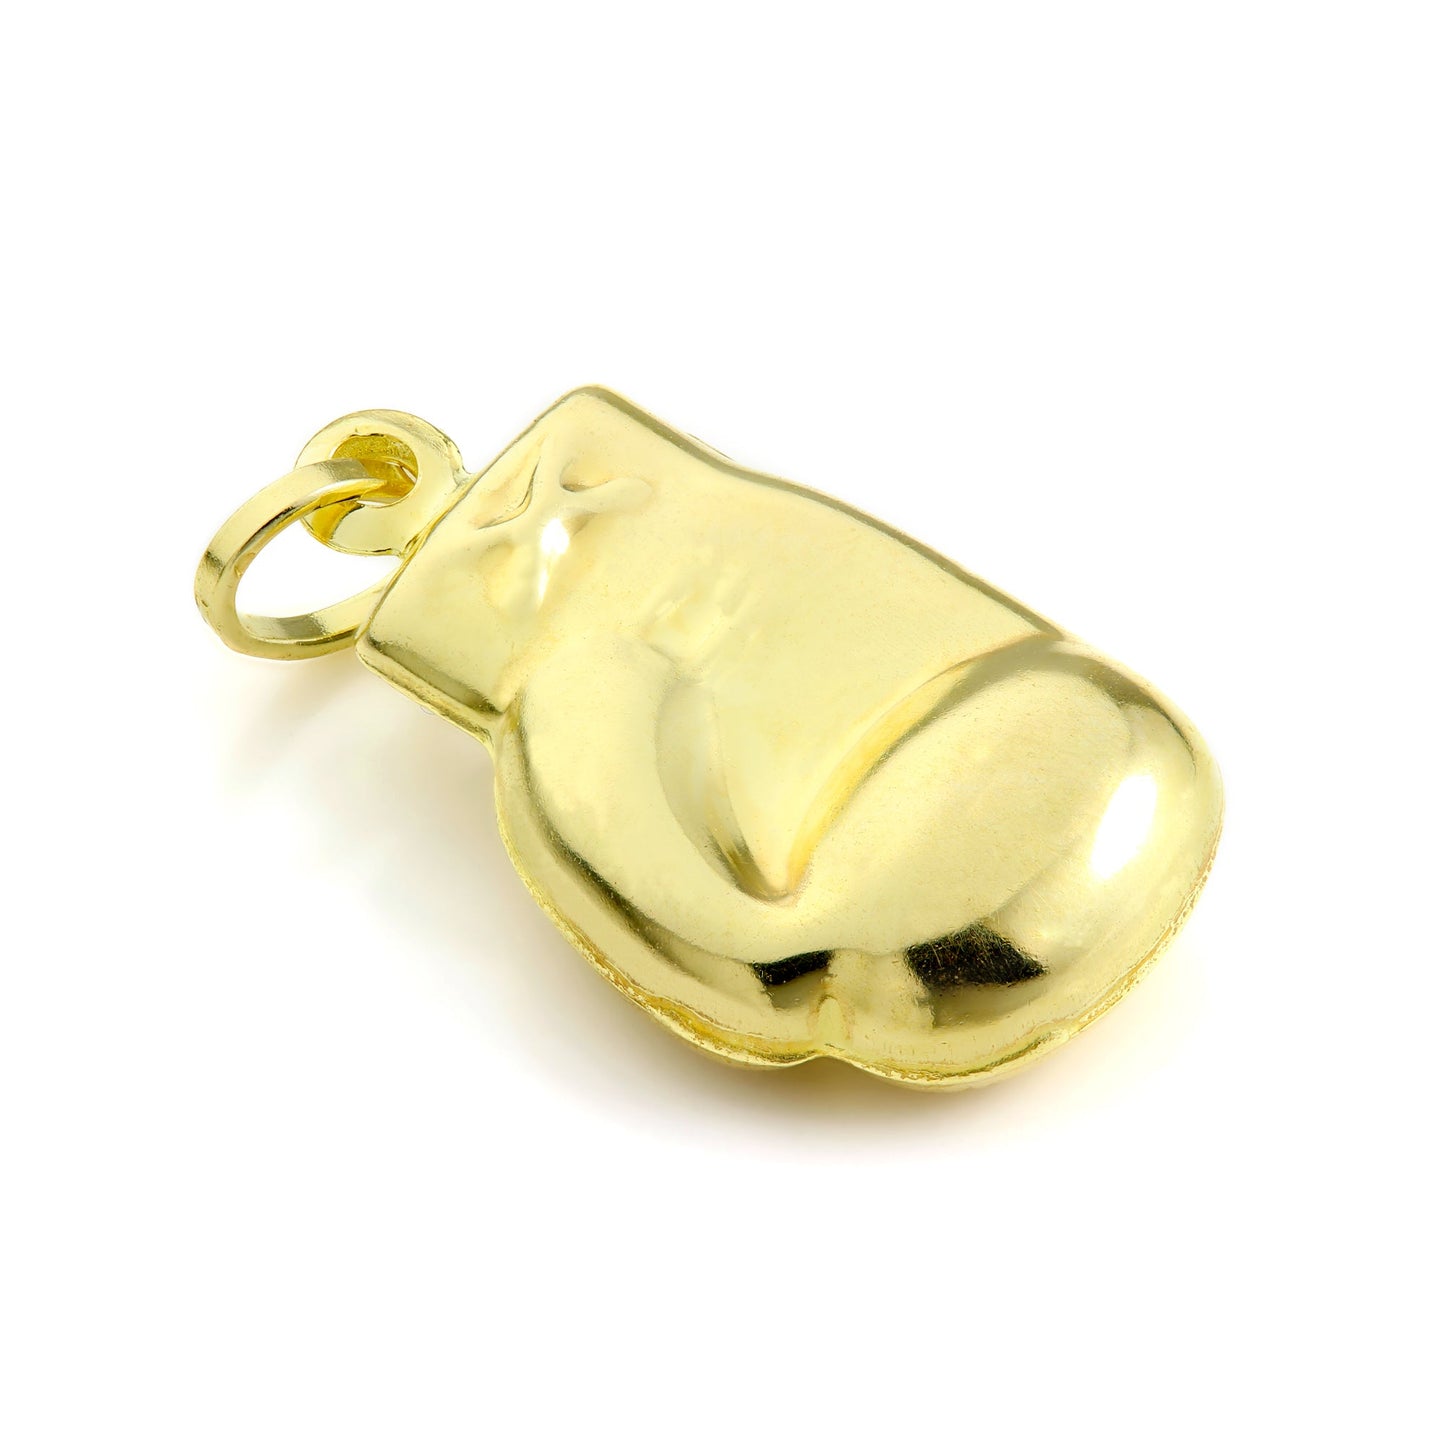 9ct Gold Hollow Boxing Glove Charm